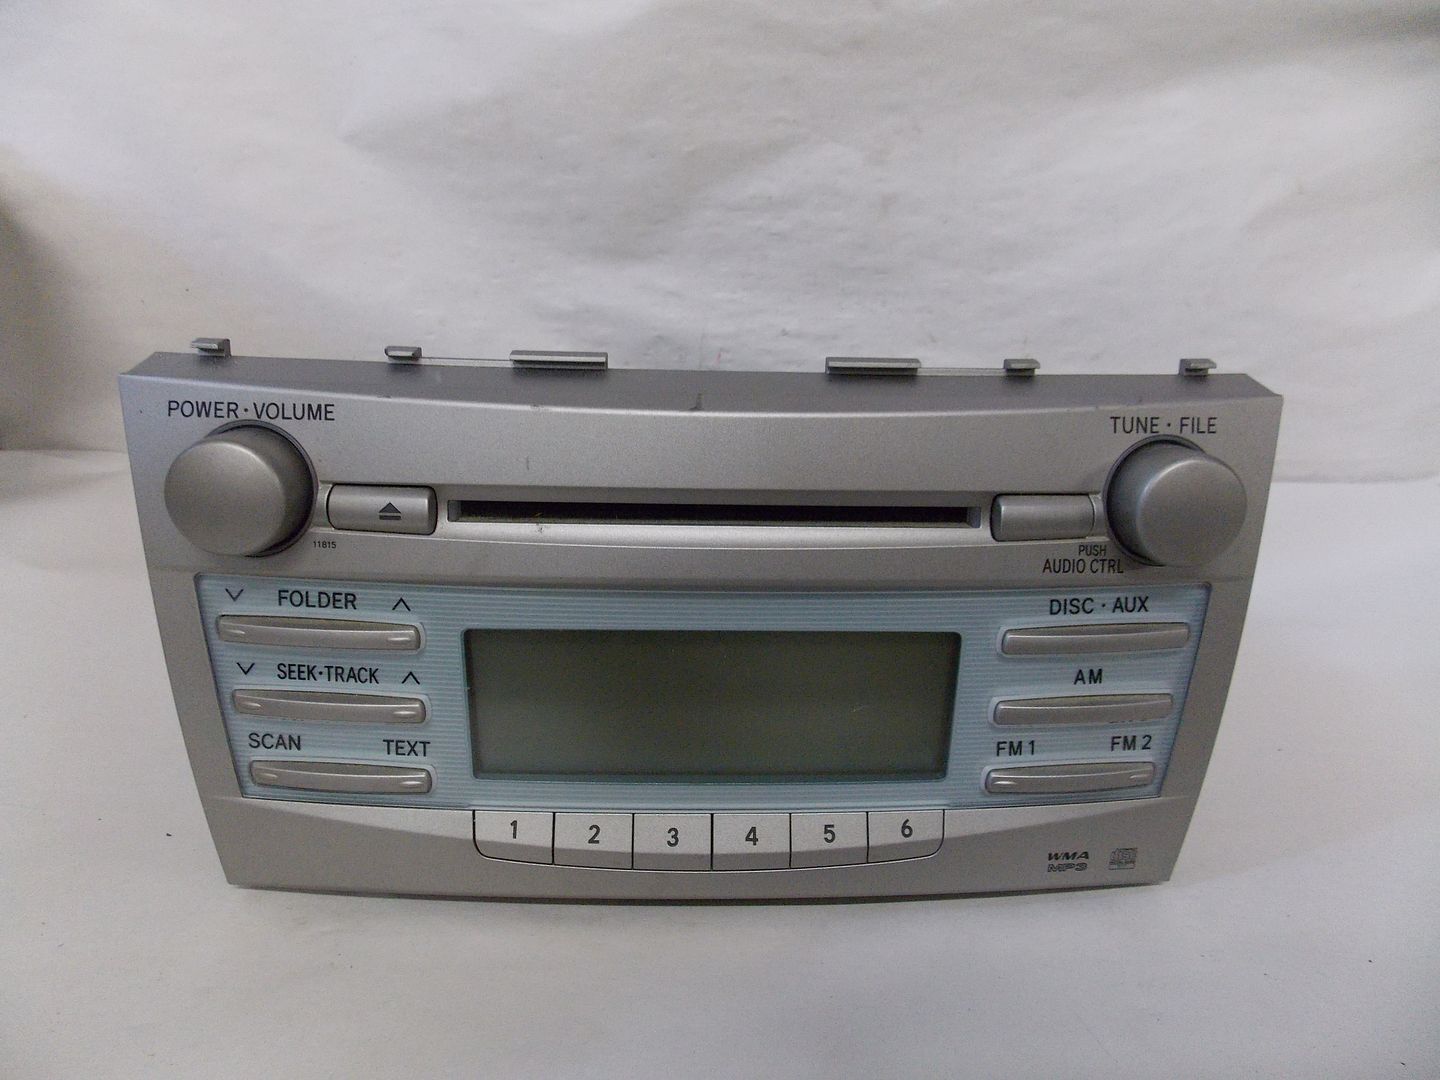 2008 toyota camry mp3 player #7